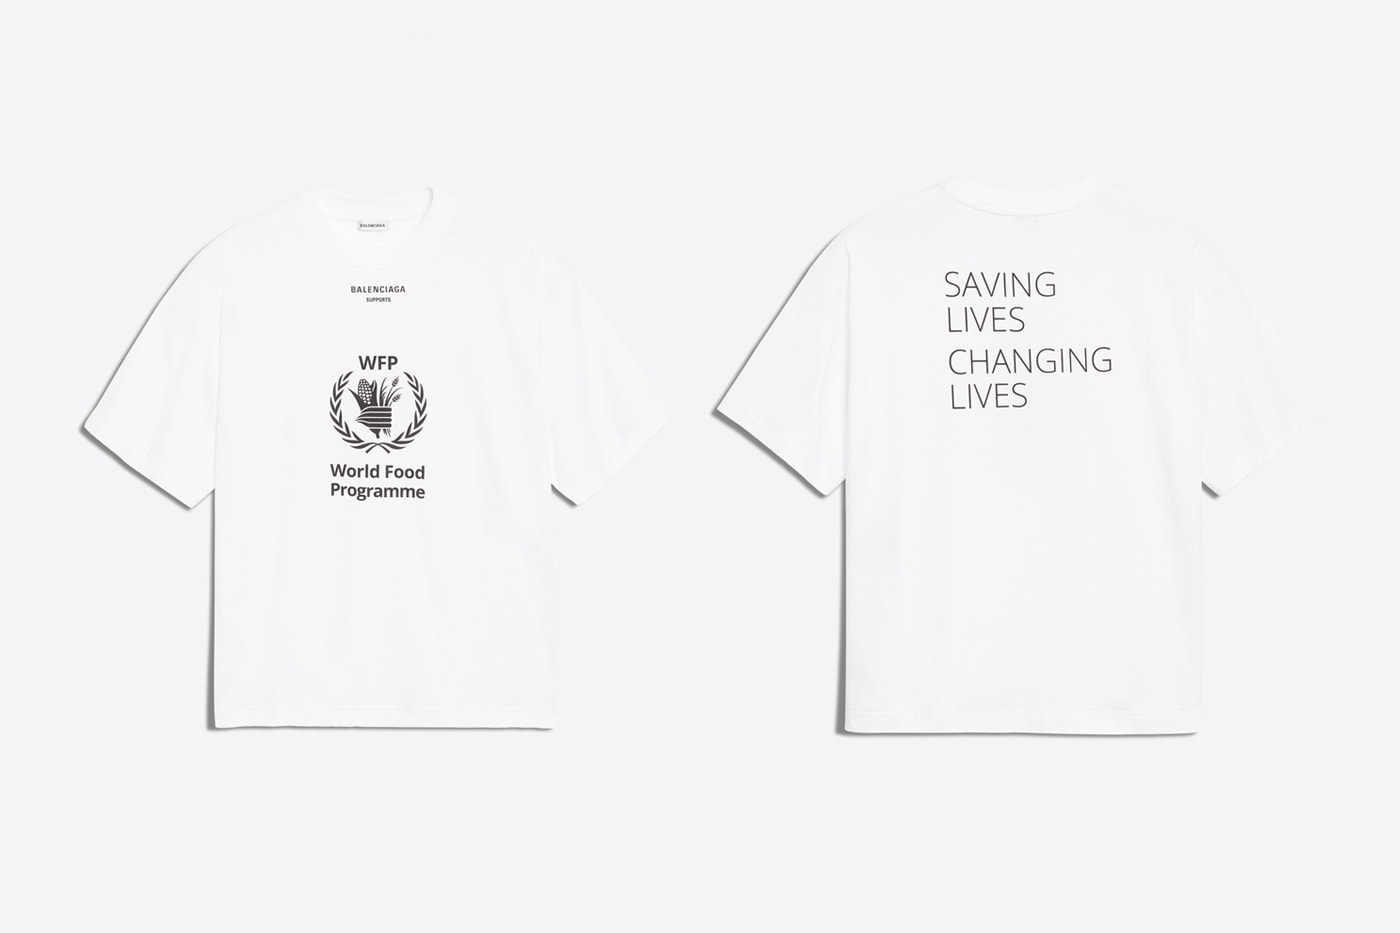 Balenciaga The World Food Programme Capsule collection fall winter 2018 united nations release info